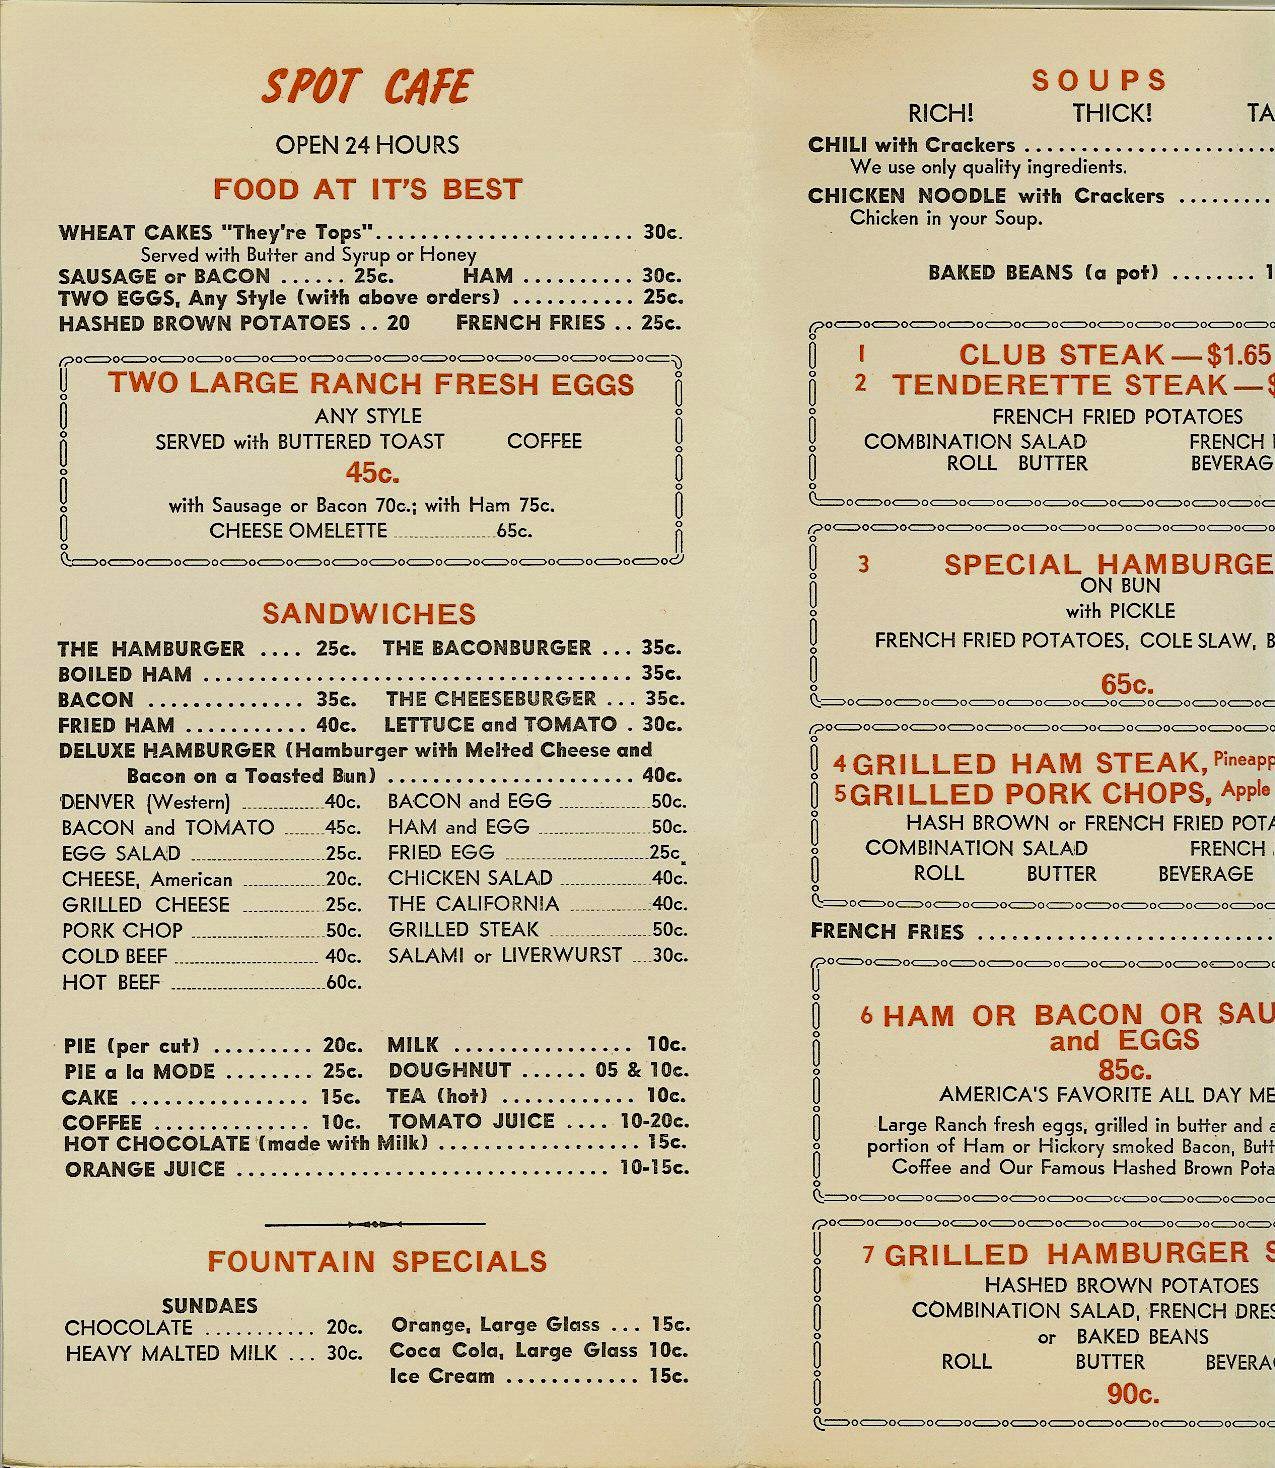 The Spot Café Menua ca. 1950? 615 South 10th Street Minneapolis, Minnesota Shut down because it was a bookie joint downstairs. Original menu recovered from a dumpster.